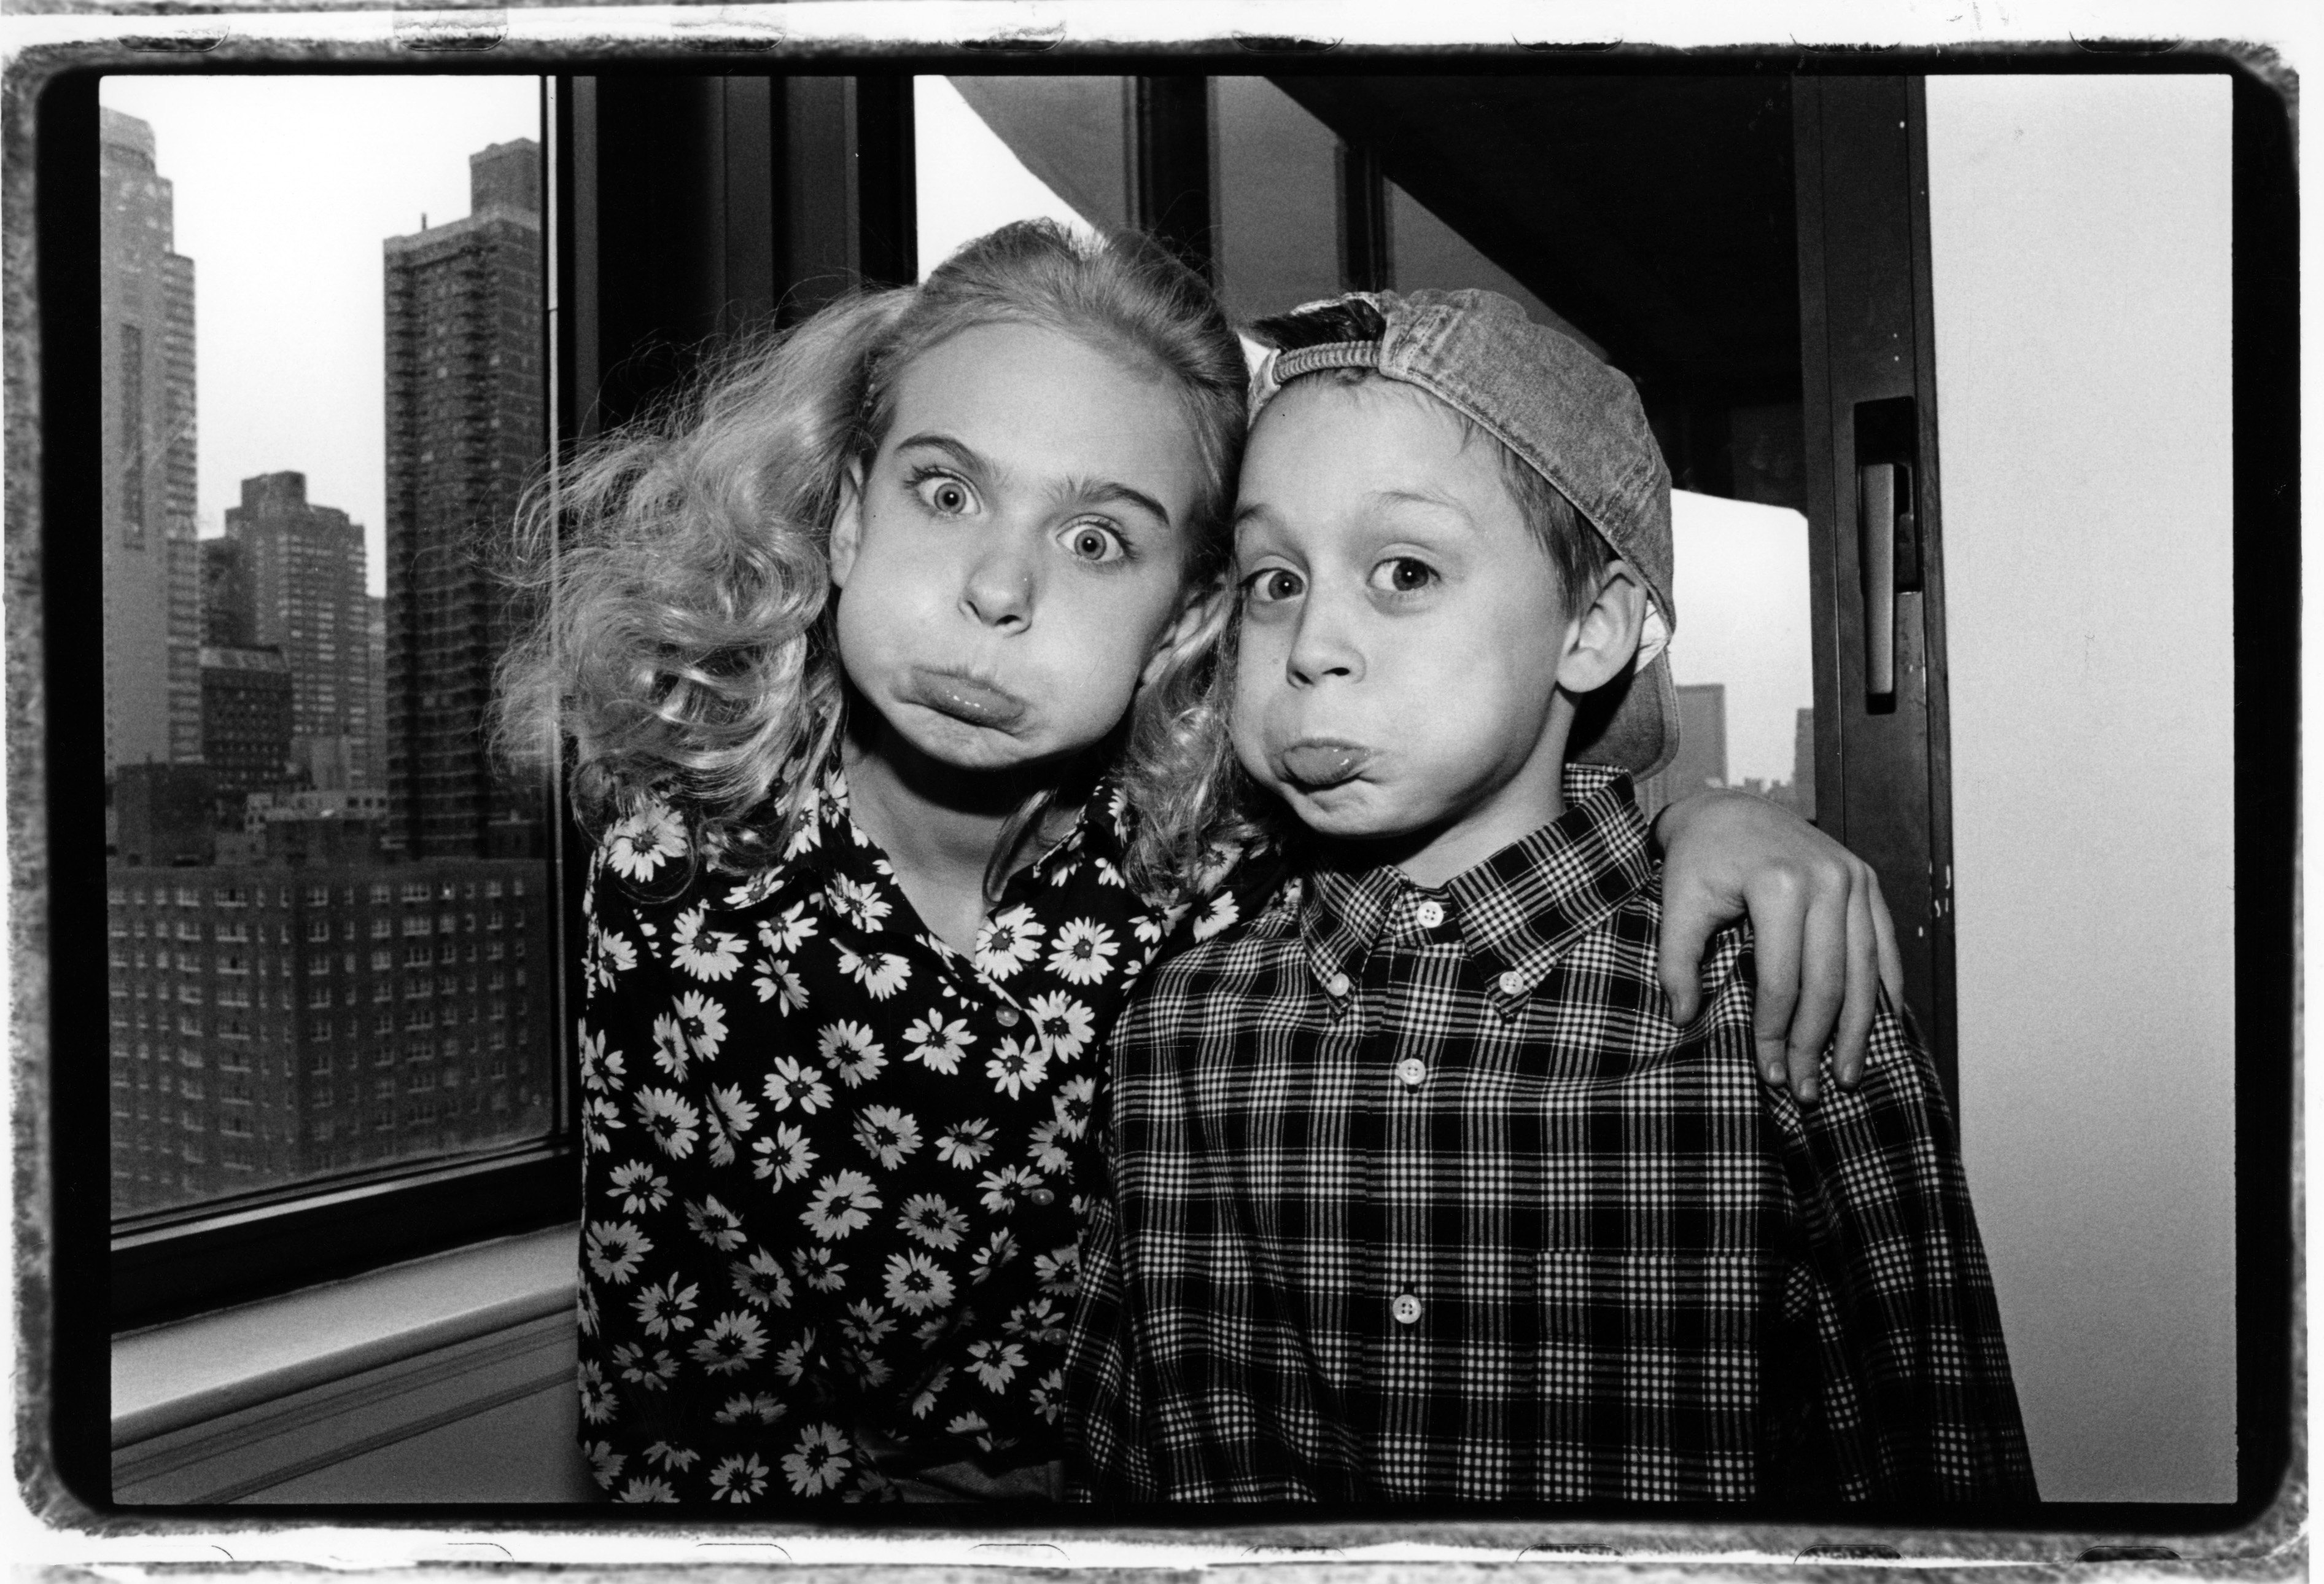 Laura Bundy and Kieran Culkin pose for a portrait in March 1992 in New York City | Source: Getty Images